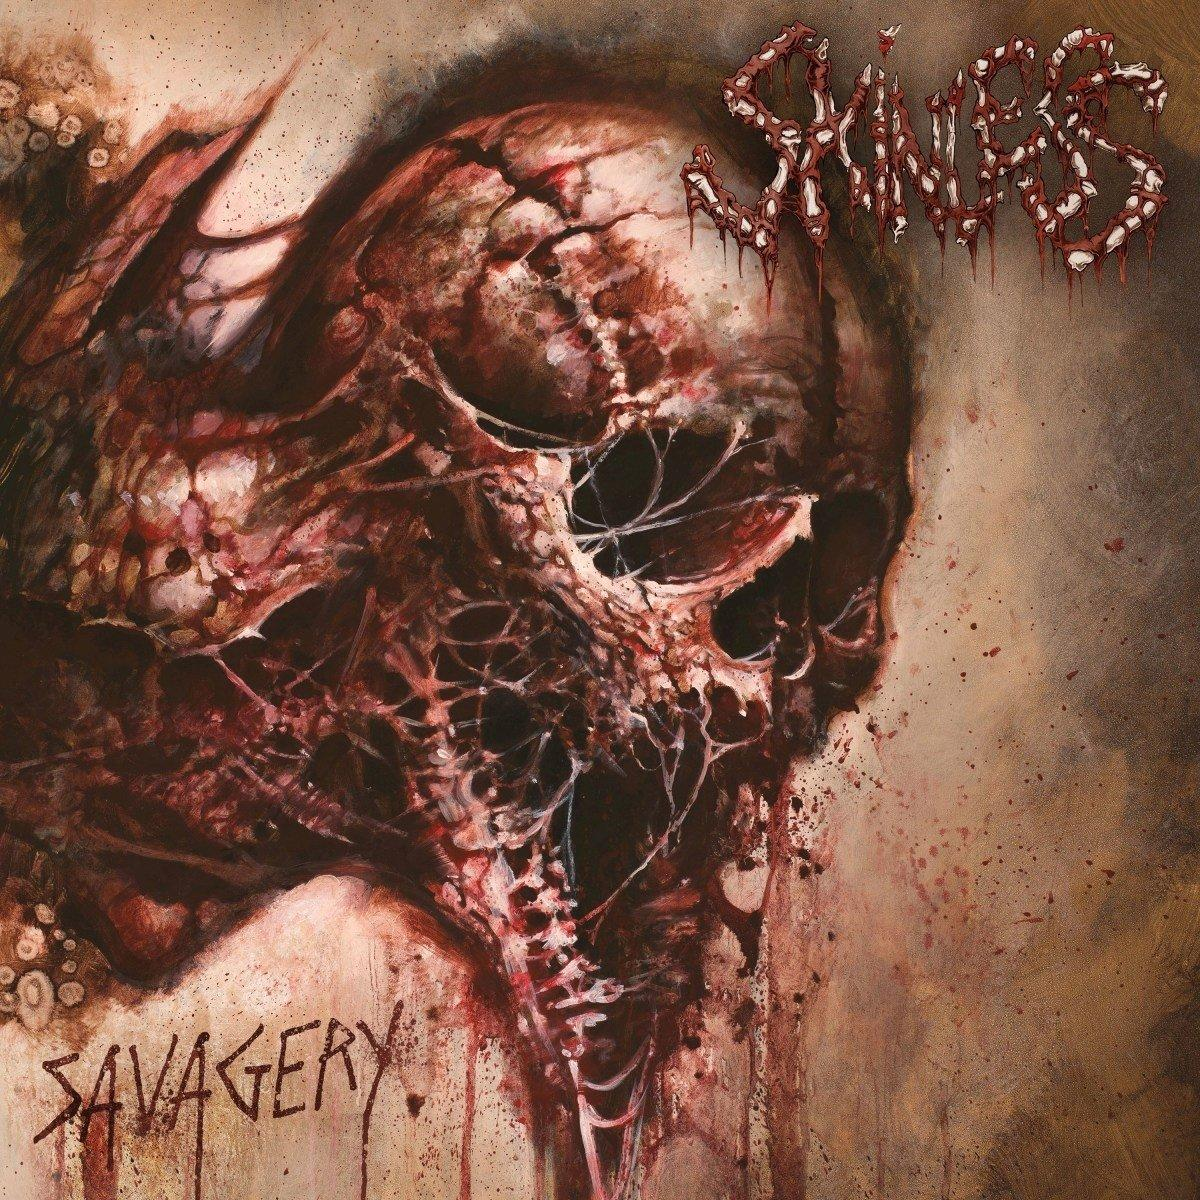 - Savagery (CD) - Skinless